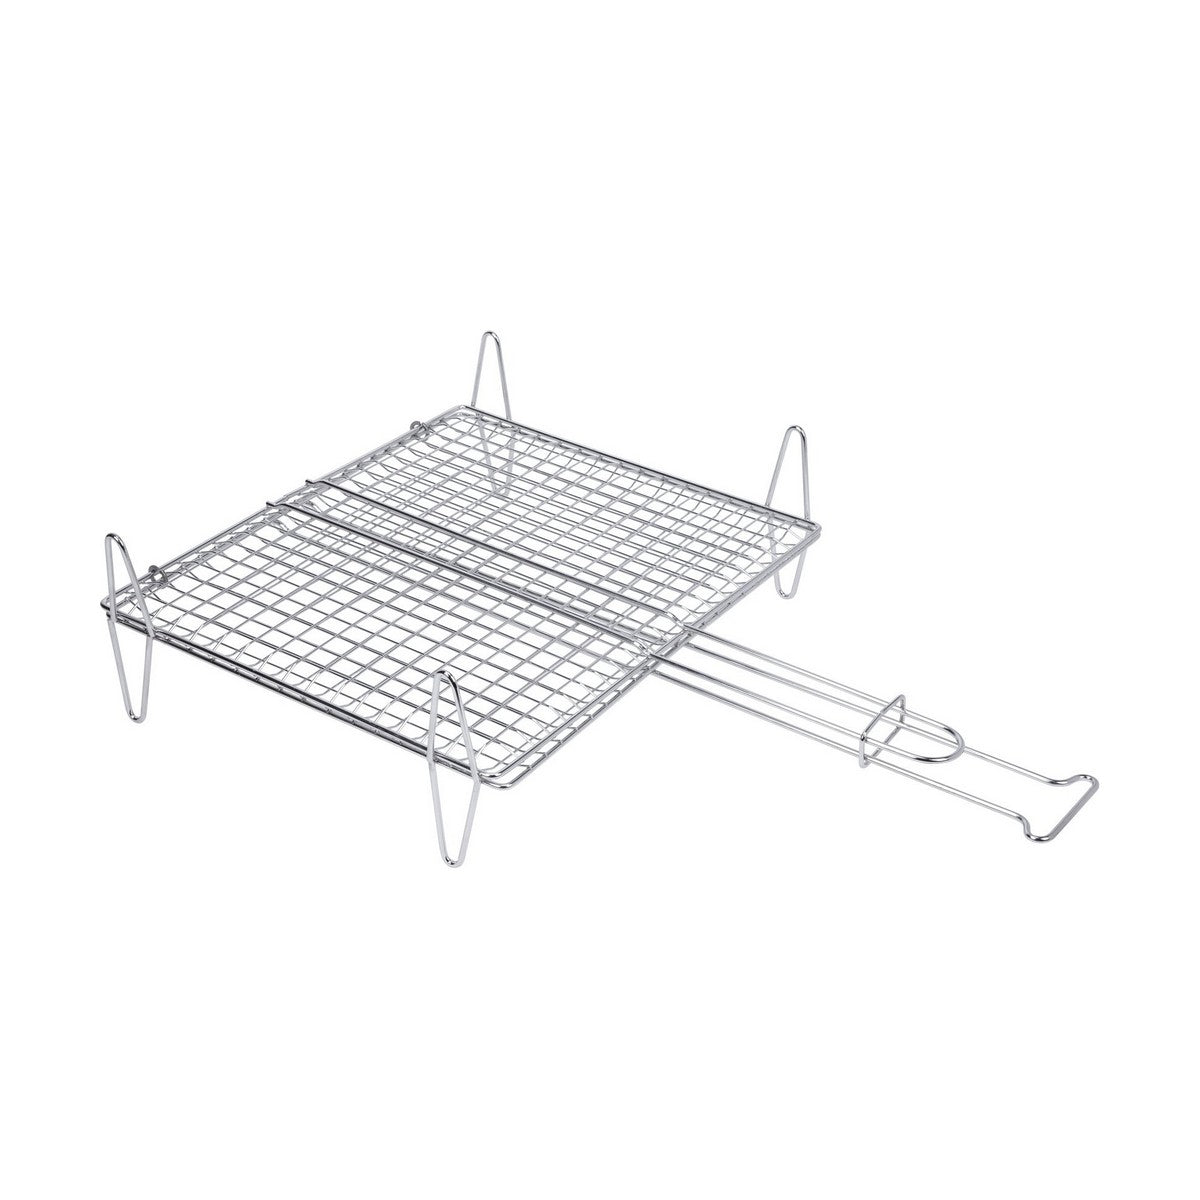 Barbecue grill til fisk Sauvic zink (30 x 35 cm)